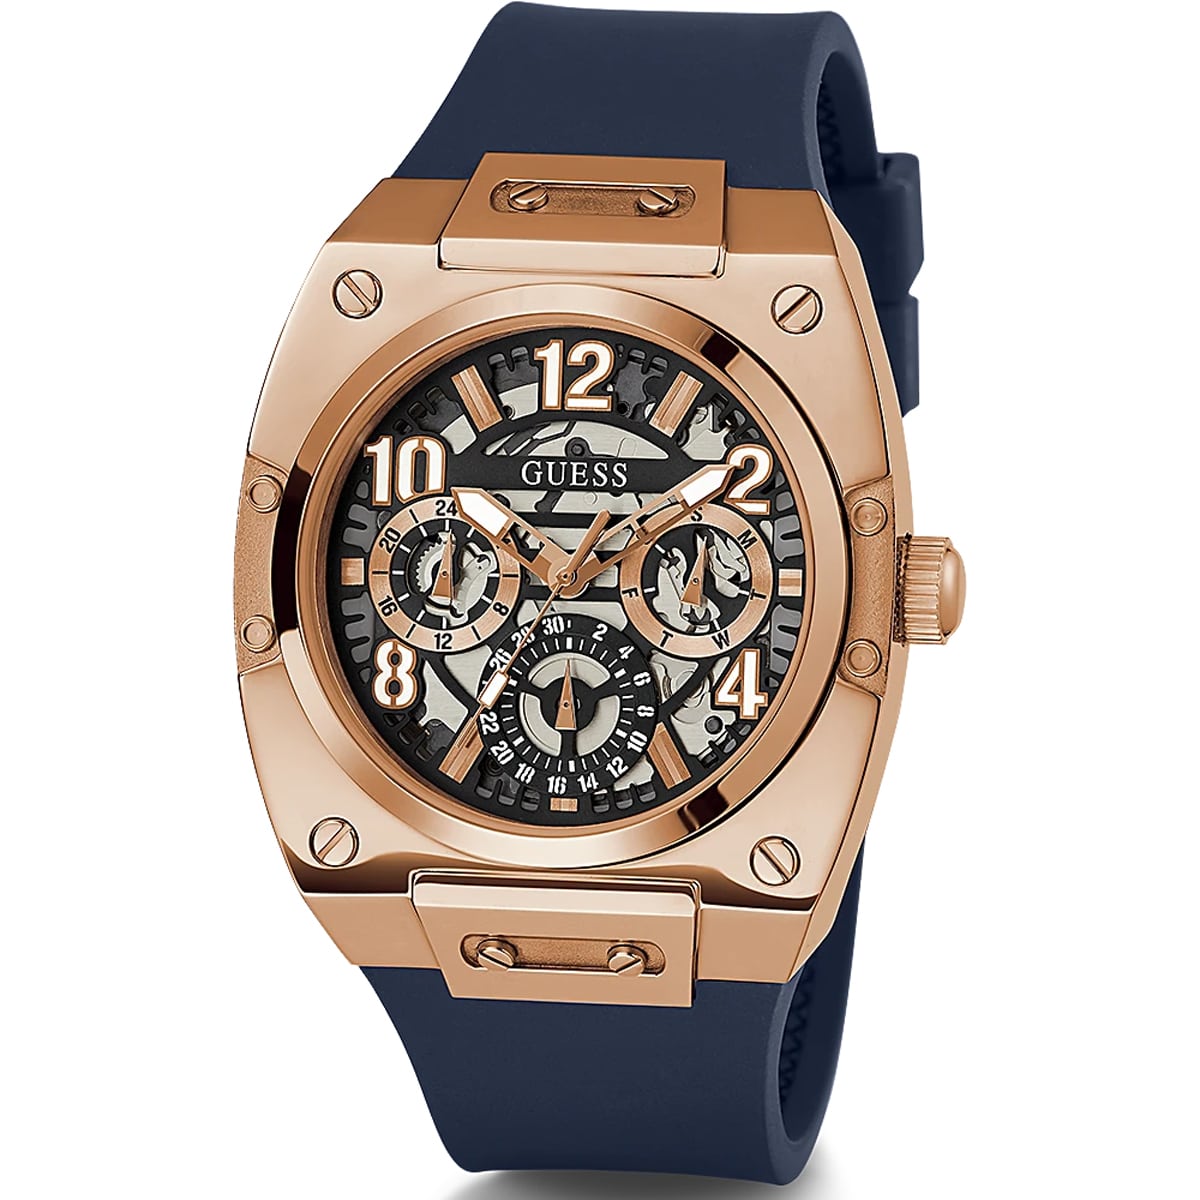 Montre Guess Homme Mens Trend Prodigy